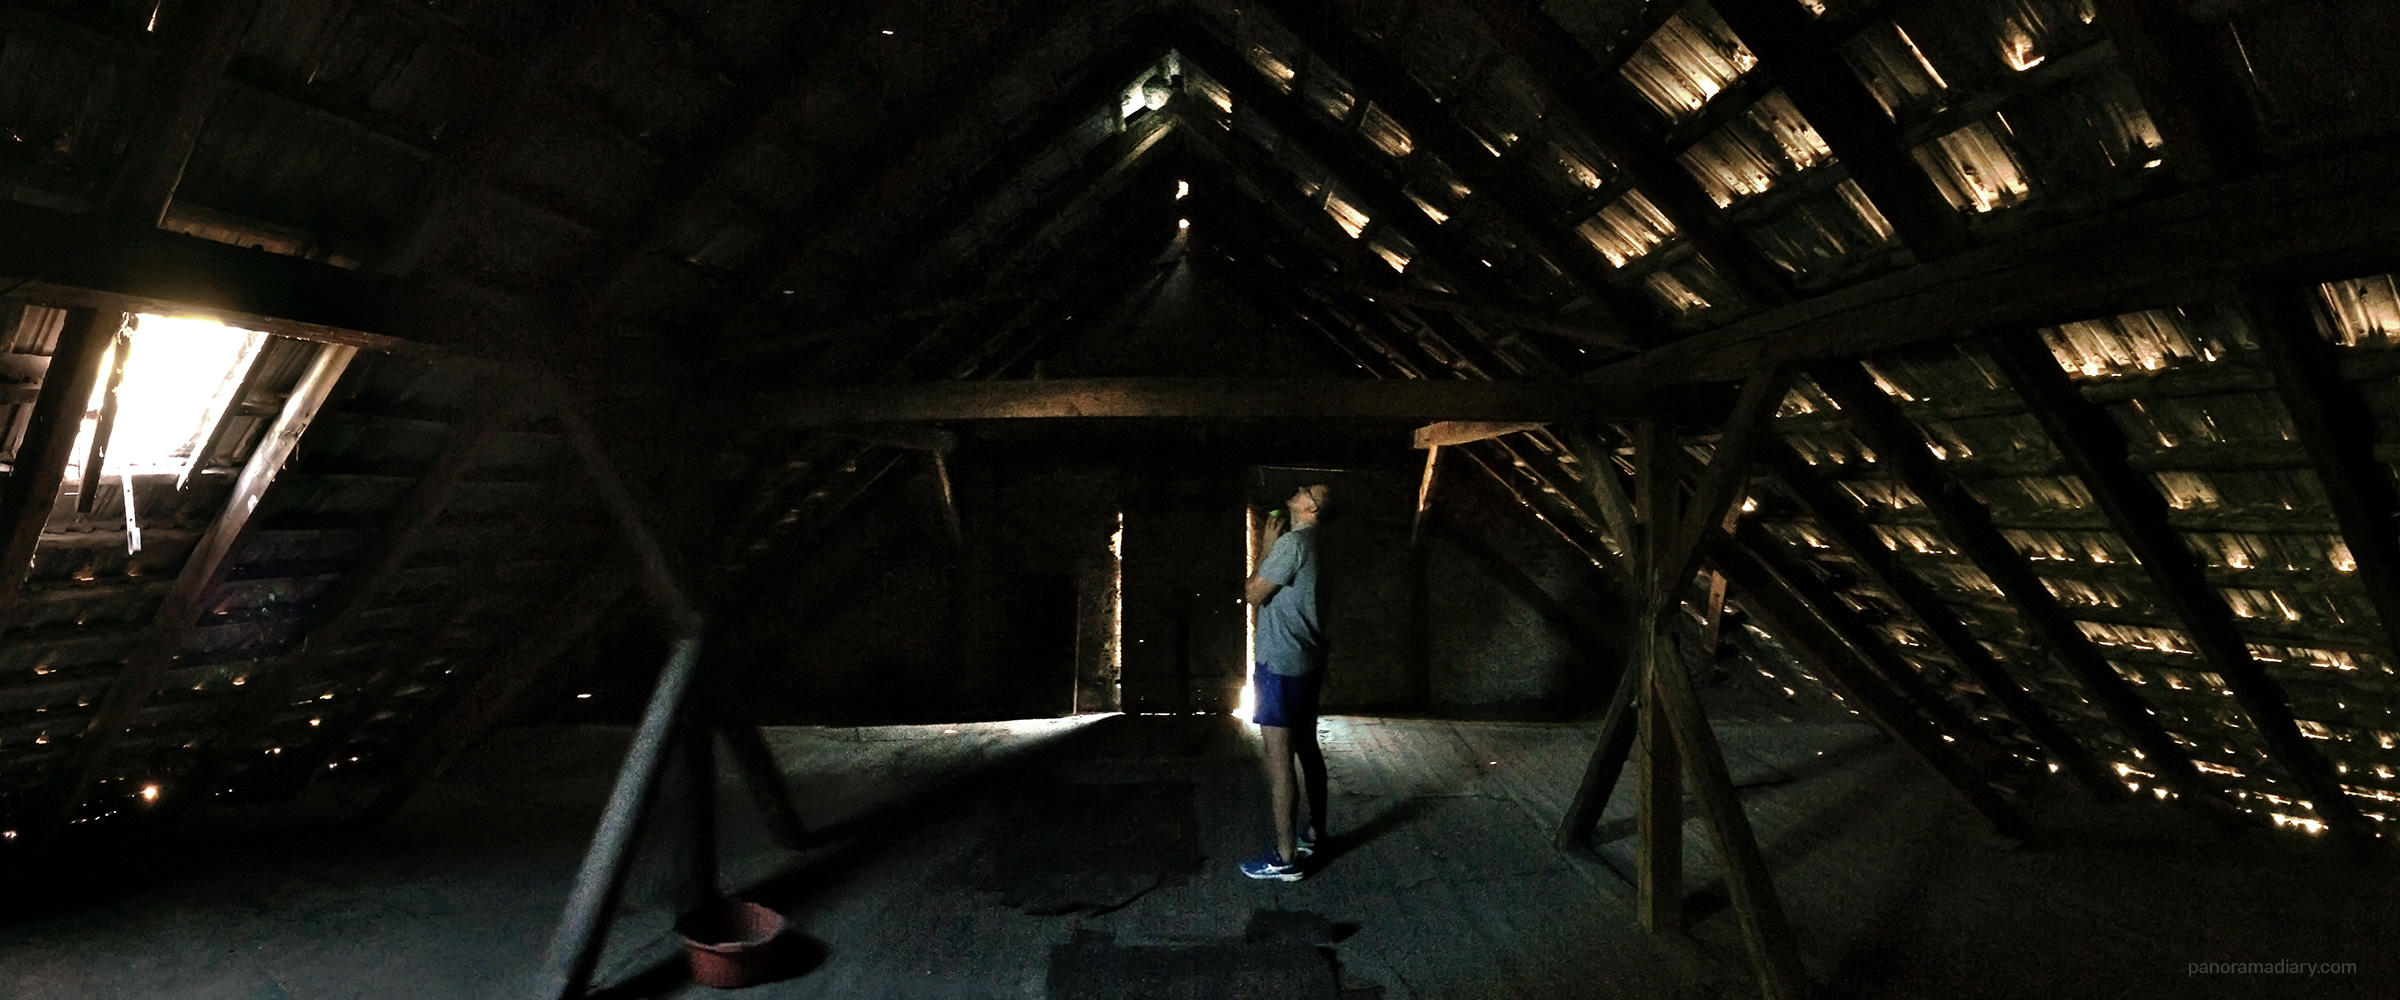 PANORAMA DIARY | Wasp nest under the roof